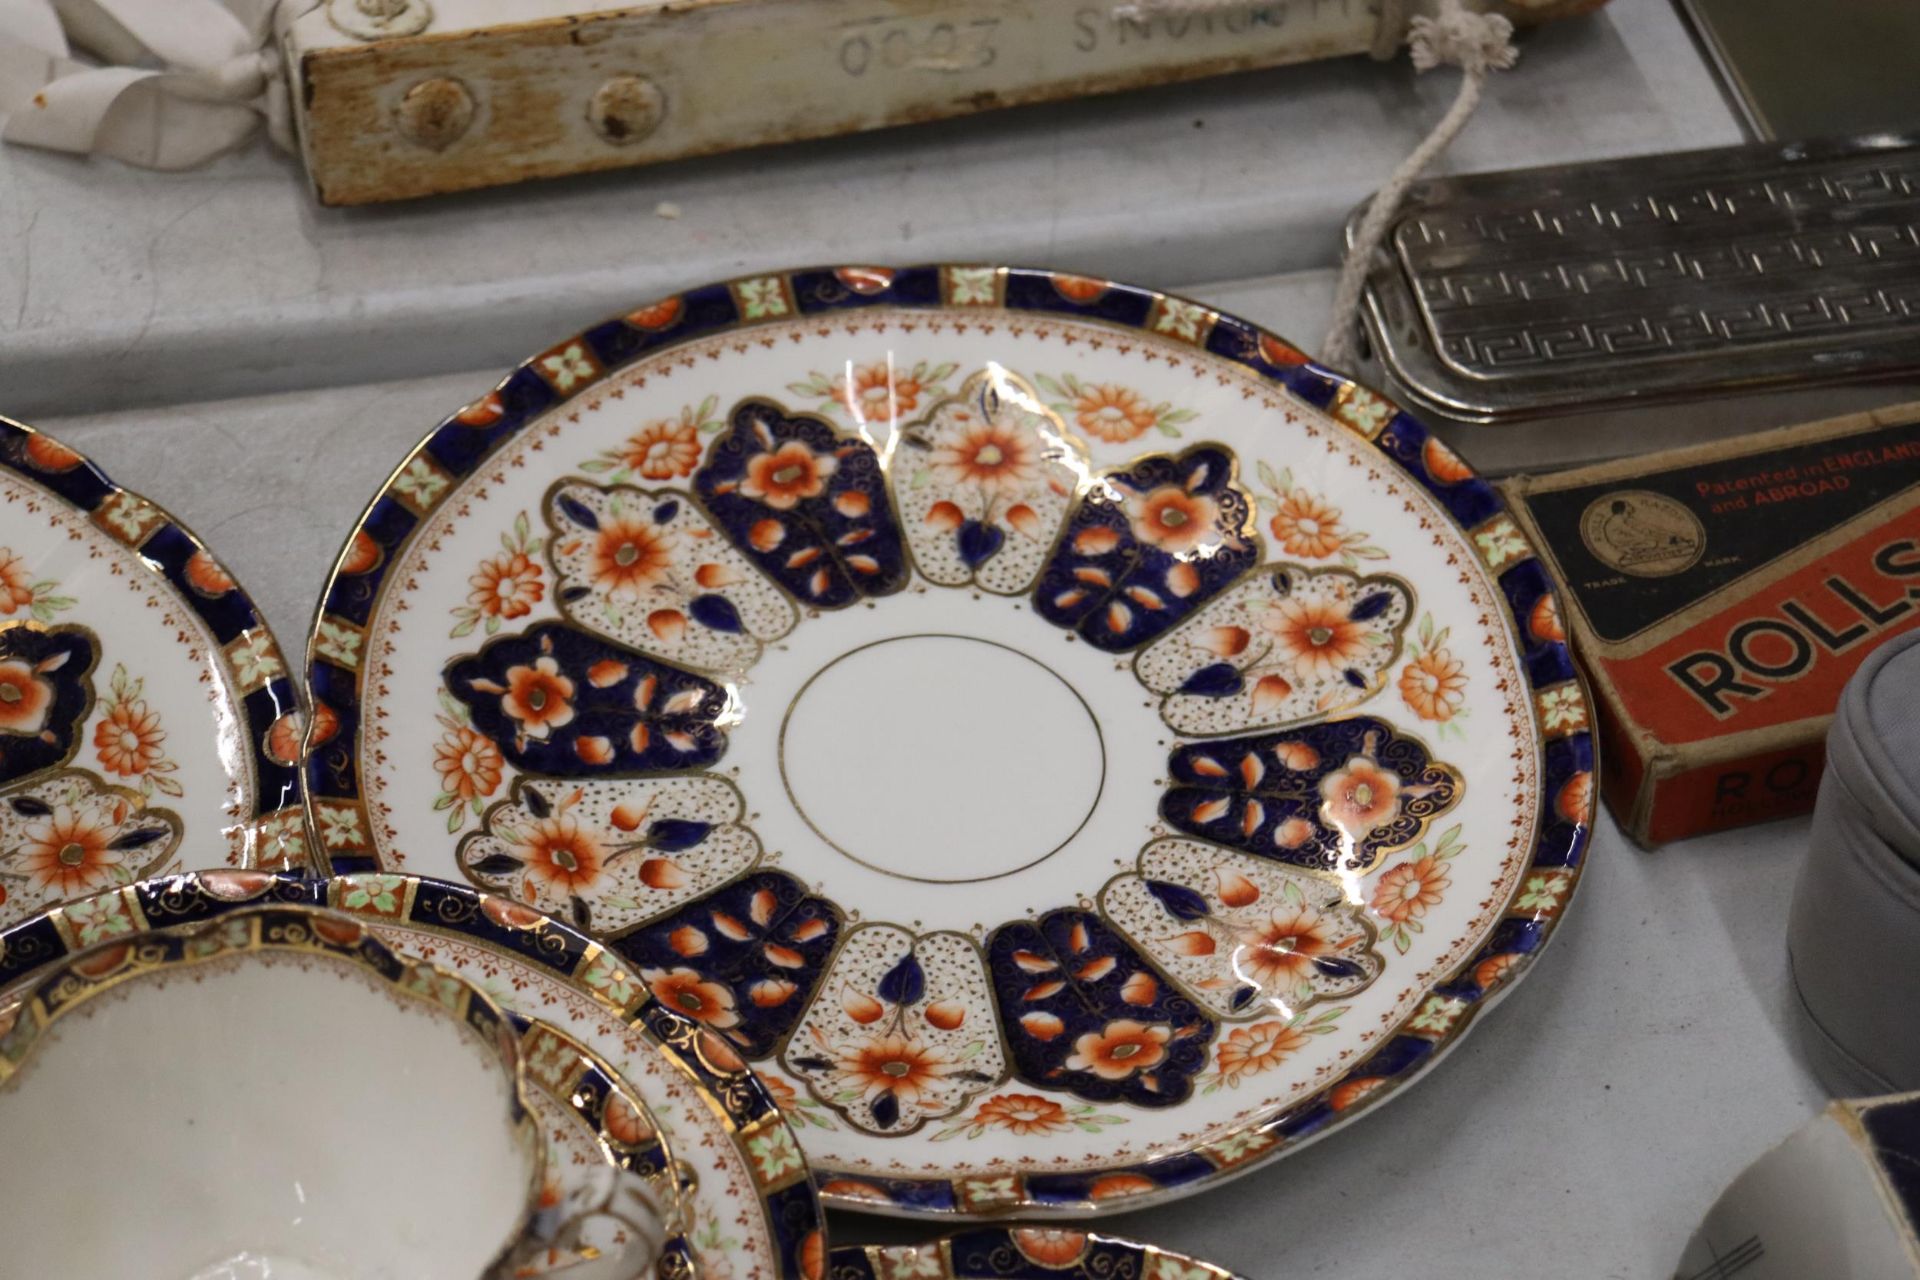 AN ANTIQUE 'COURT CHINA' TEASET TO INCLUDE CAKE PLATES, CUPS, SAUCERS, SIDE PLATES AND A SUGAR BOWL - Image 6 of 9